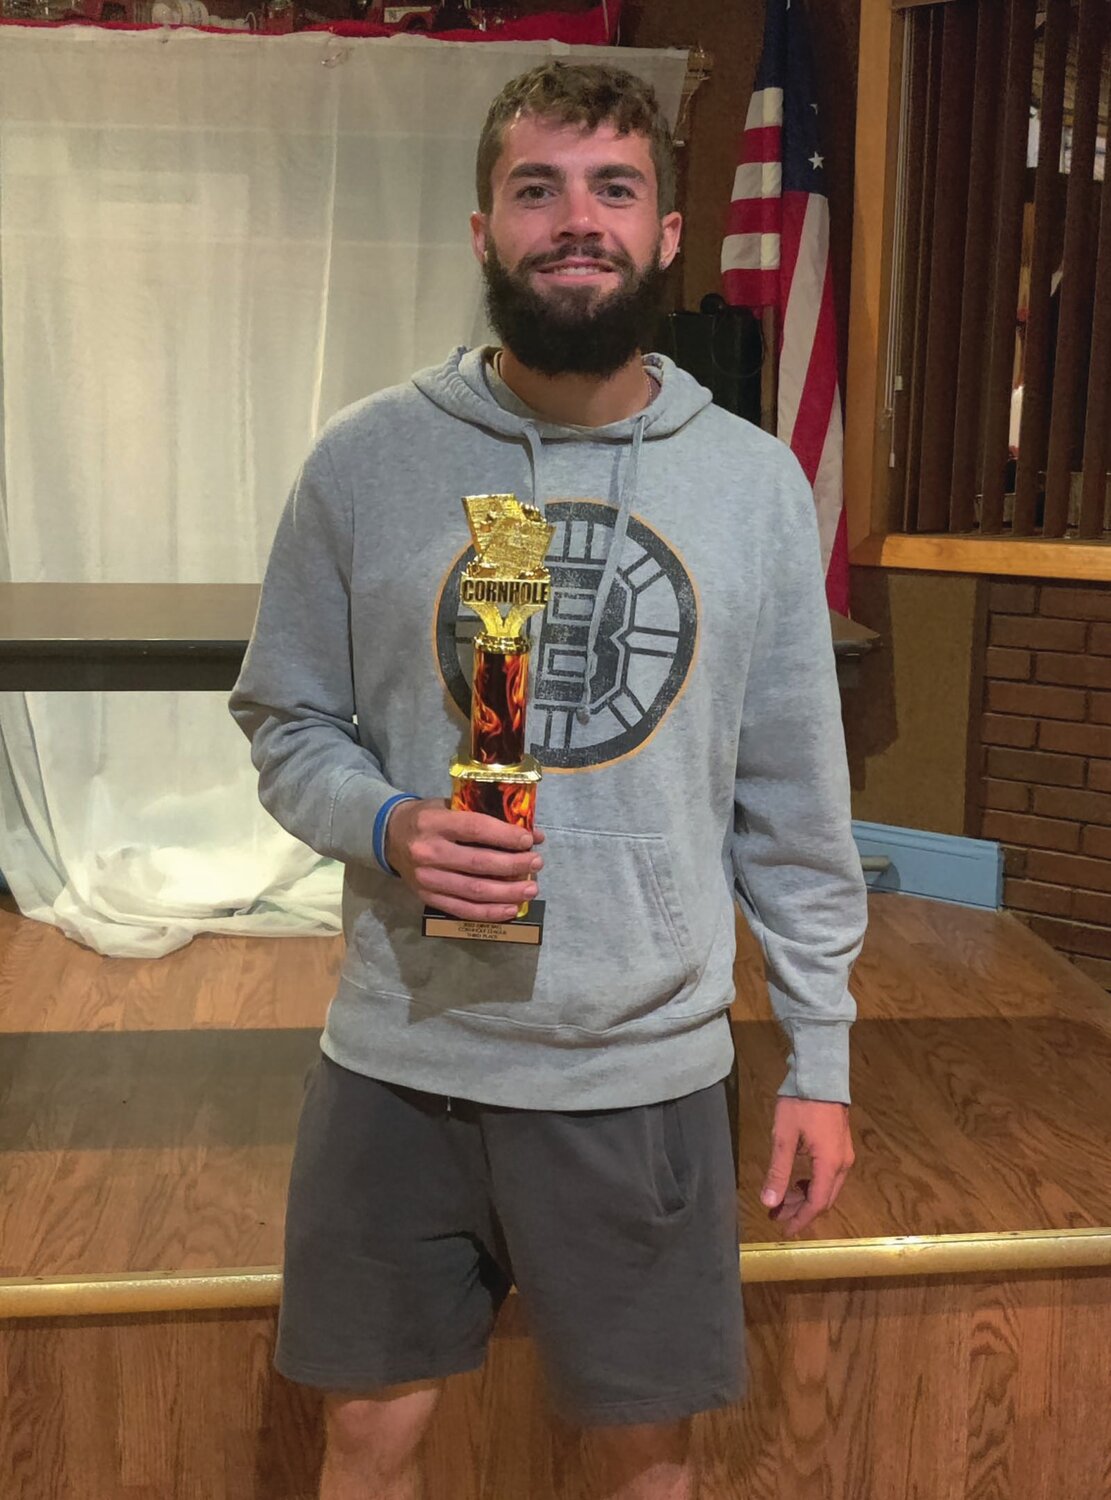 TALENTED TOSSER: DJ Kowalik is holding the third trophy during the OBVF’s most recent Corn Hole League awards night.